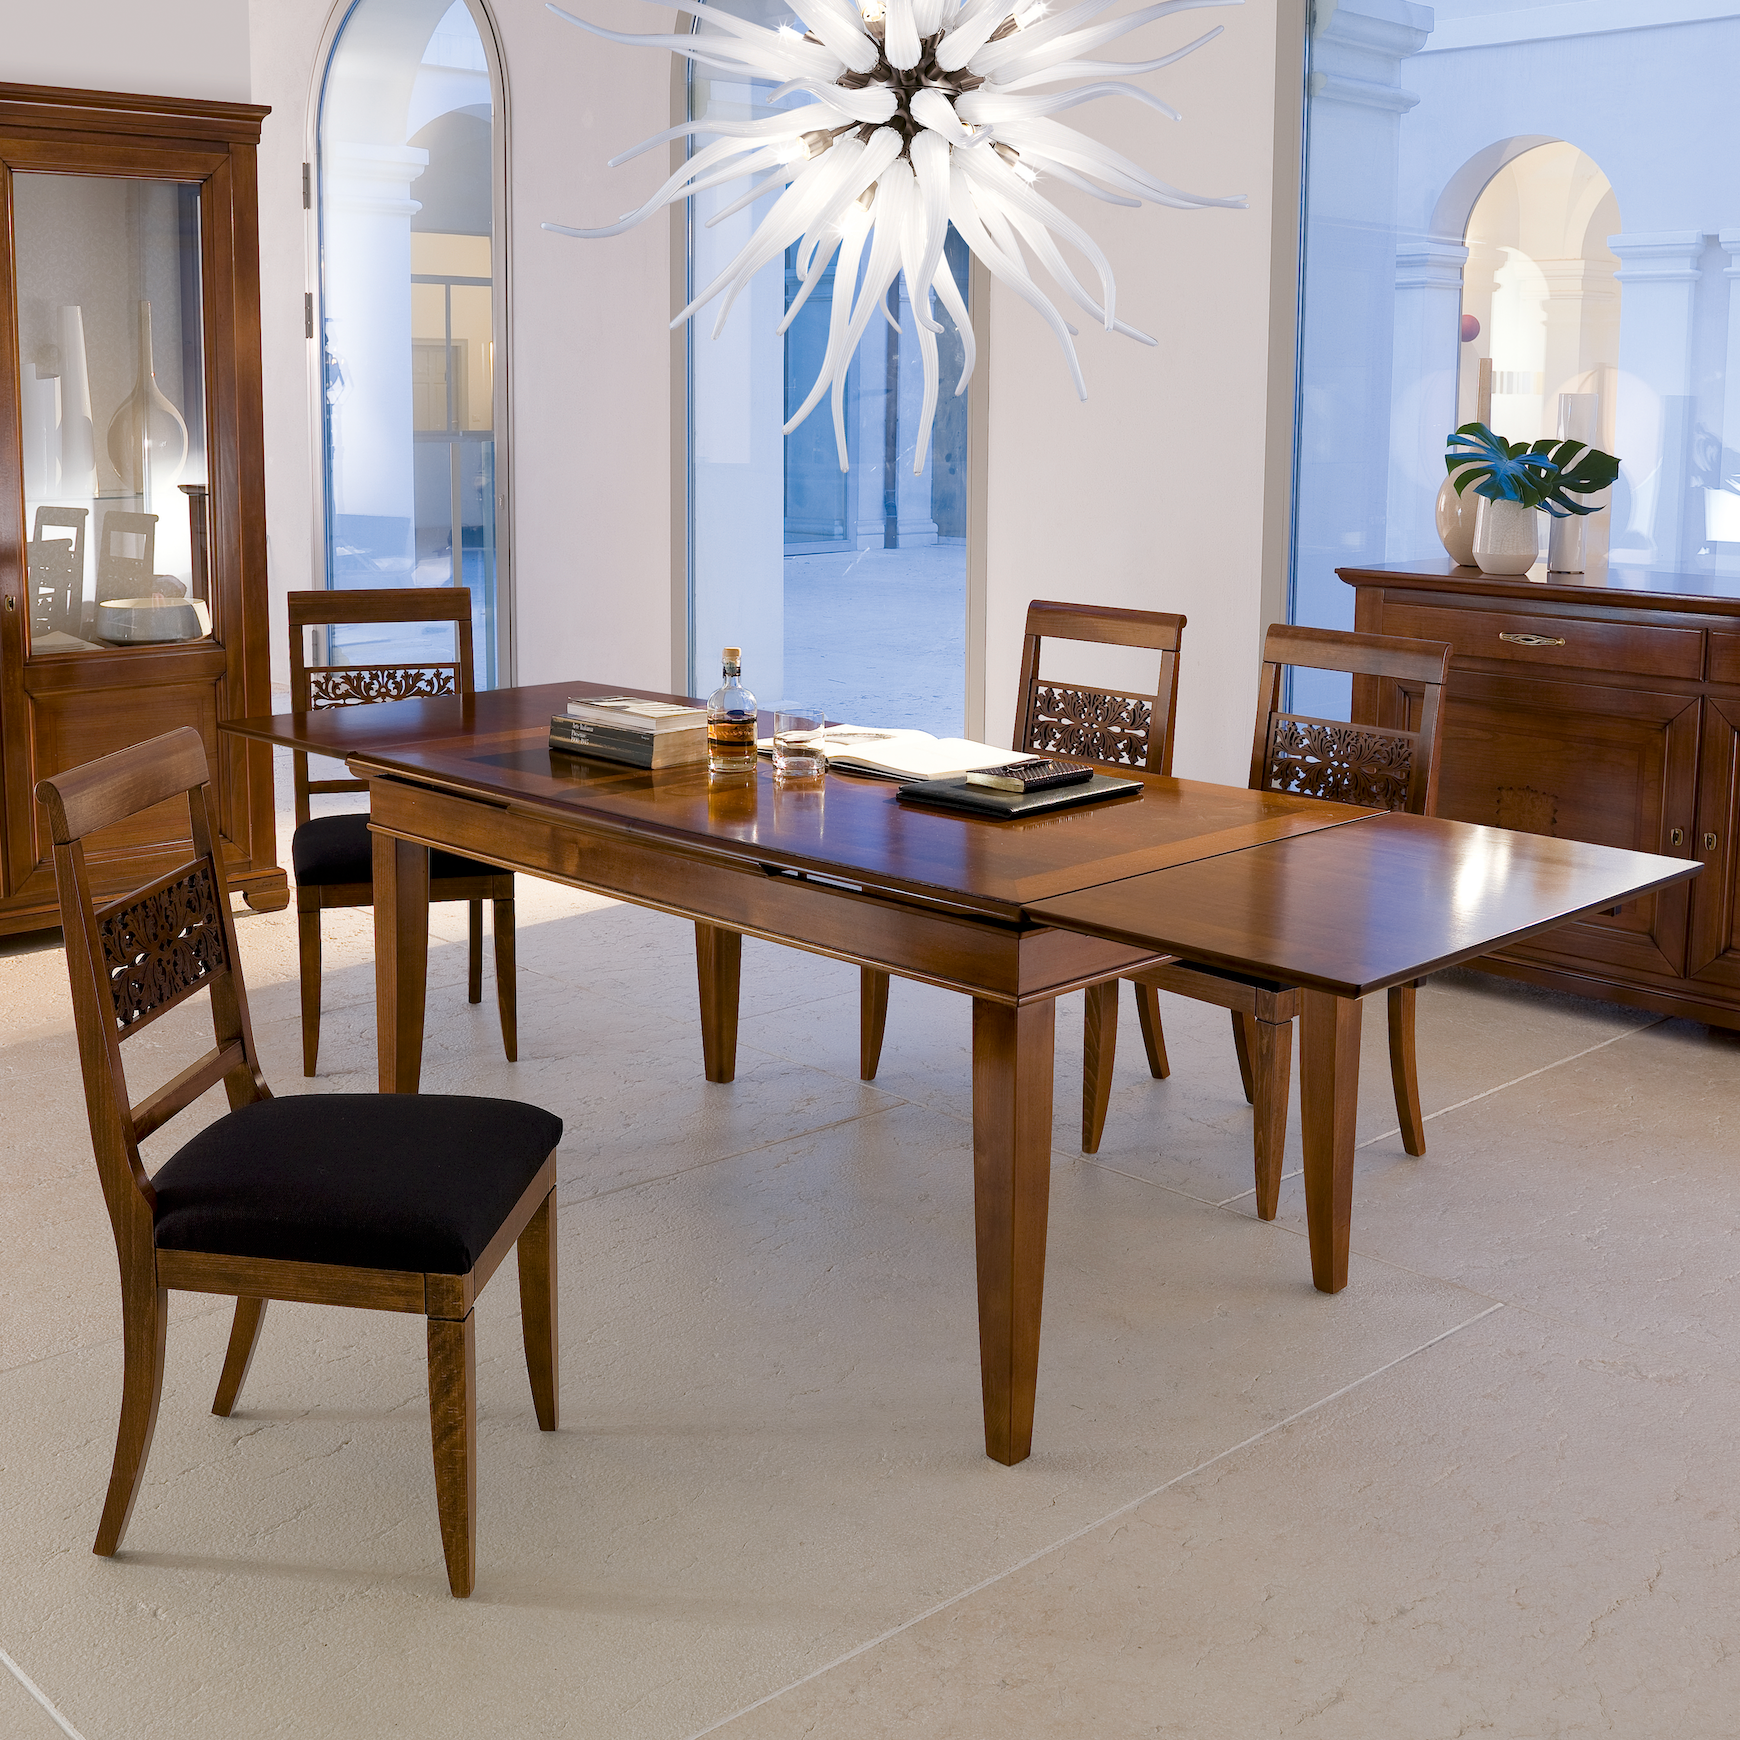 Classic Extendable Rectangular Table L 160 with 4 Classic Chairs in Cherry Wood and Real Leather Arte Piombini Collection